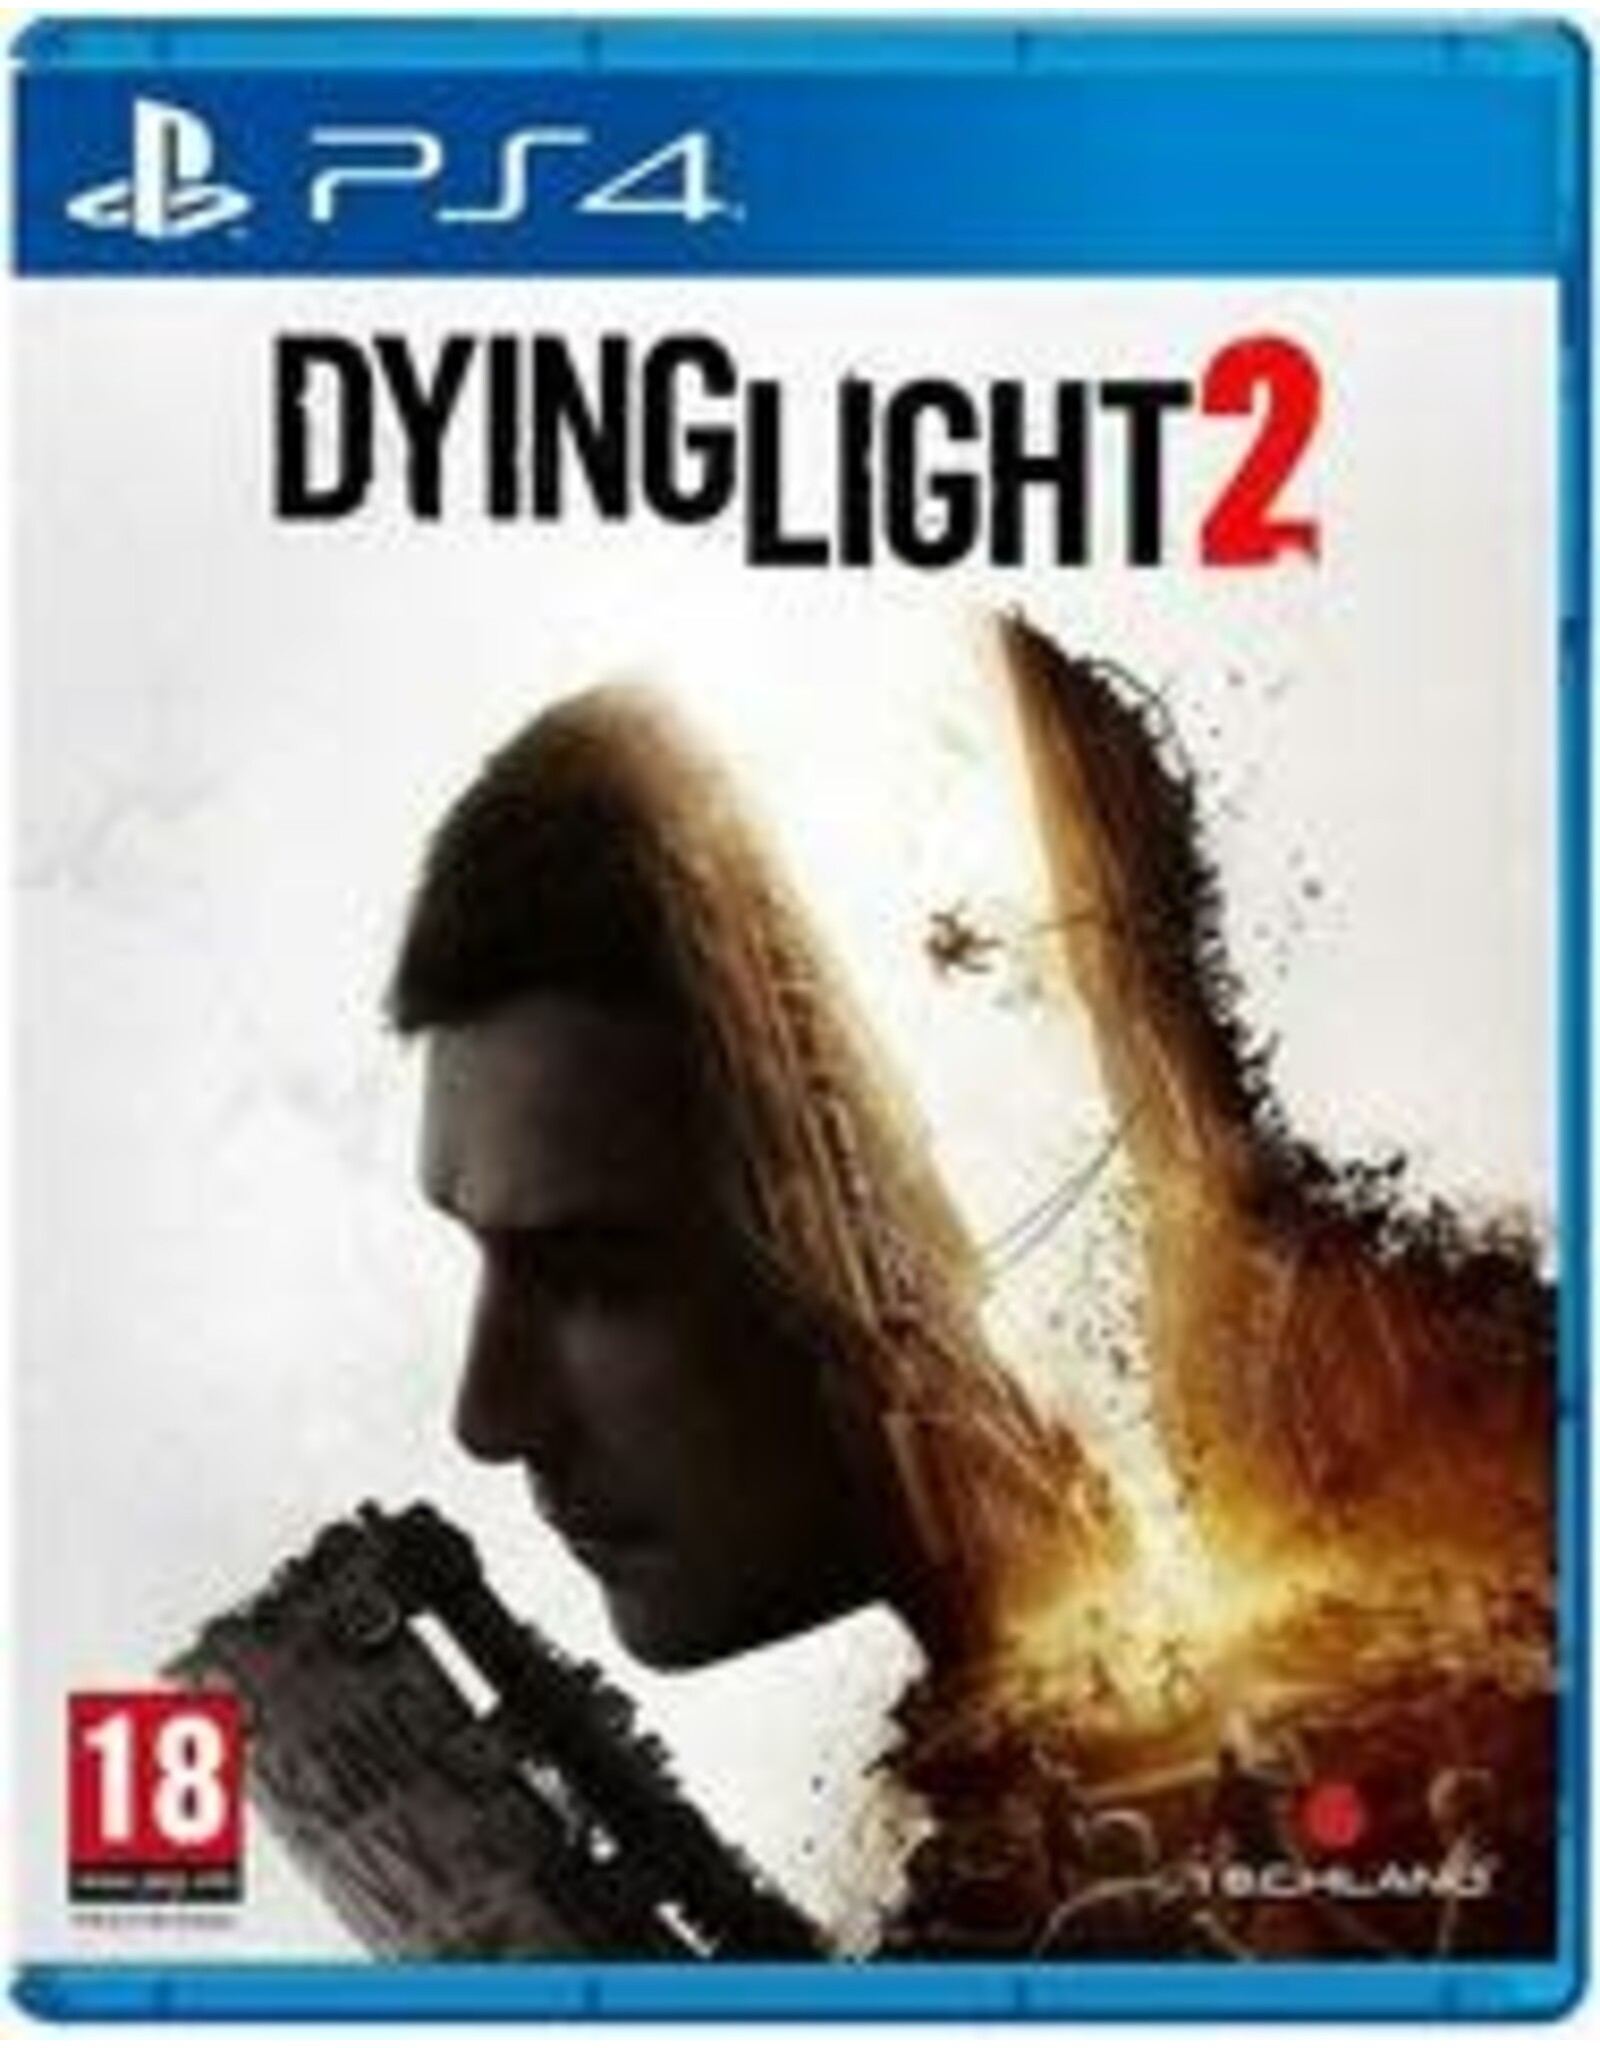 Playstation 4 Dying Light 2: Stay Human (Brand New, PAL Import)